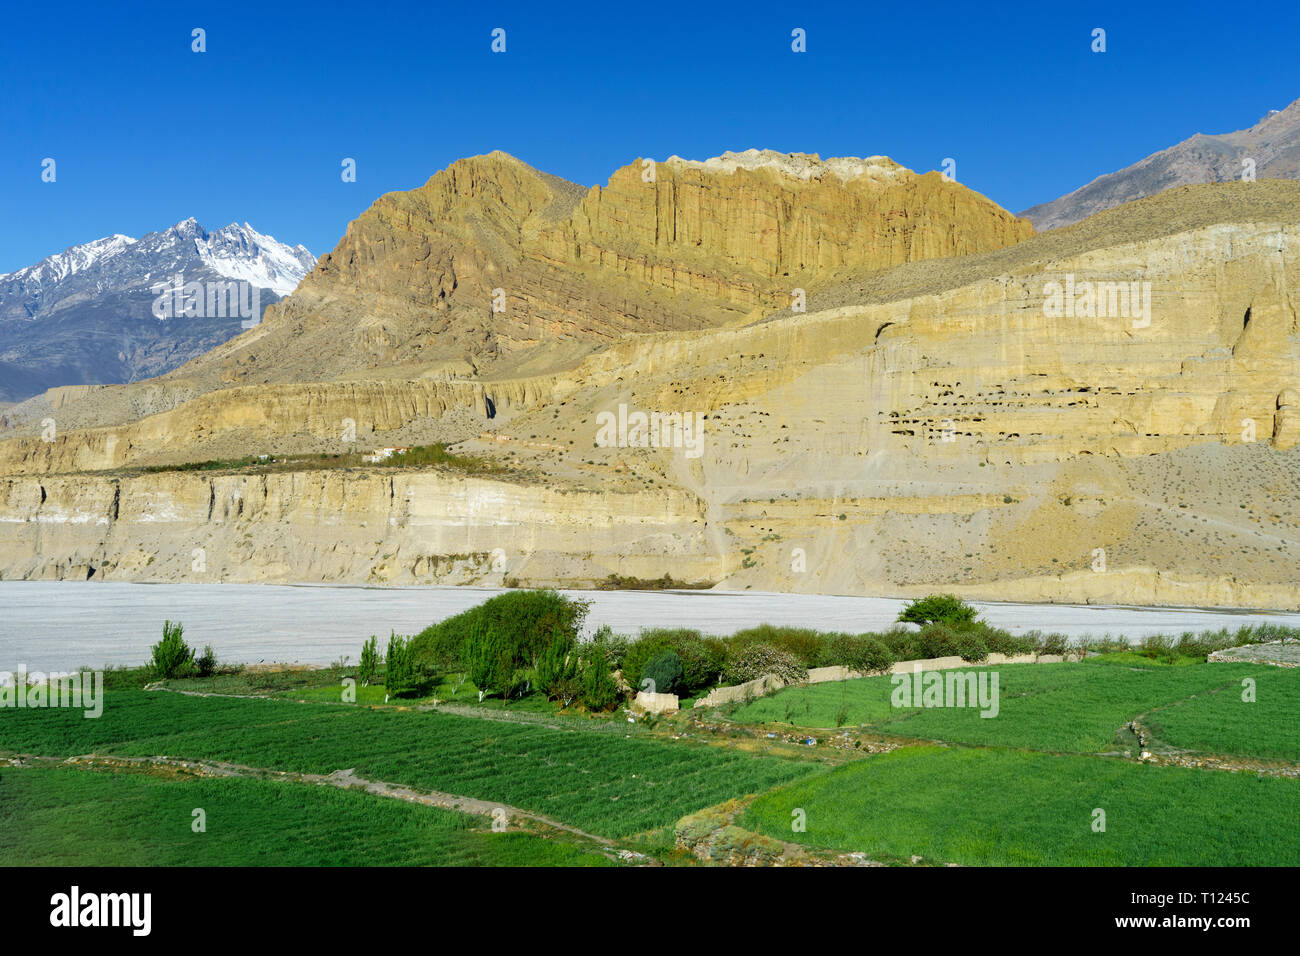 Gigantic cliff of ocre stone dotted by ancient cave dwellings, with green barley fields in the foreground. Chuksang, Upper Mustang region, Nepal. Stock Photo